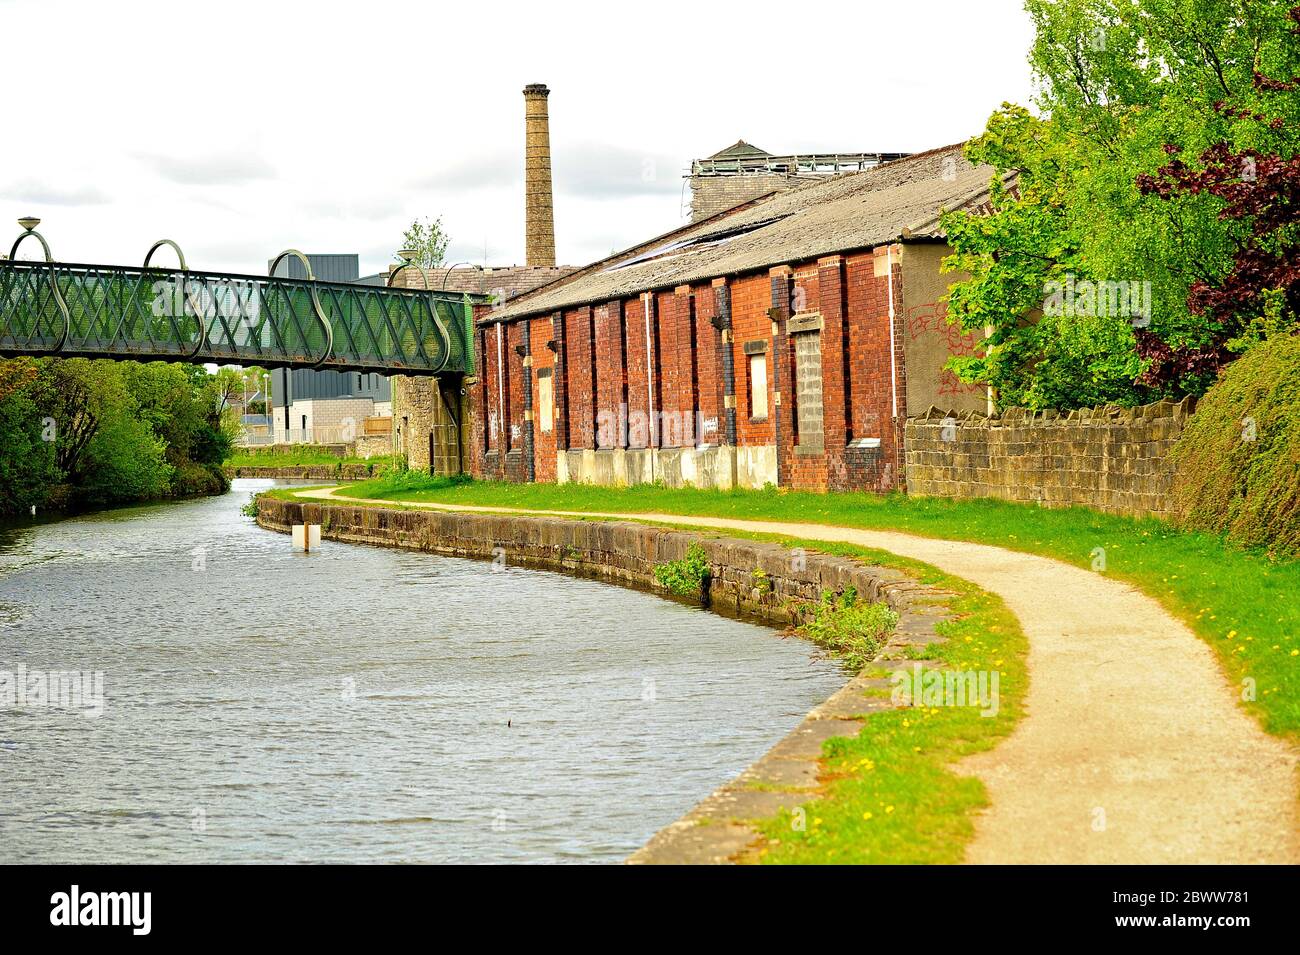 Old industrial buildings on the banks of the Leeds Liverpool canal at Burnley Stock Photo